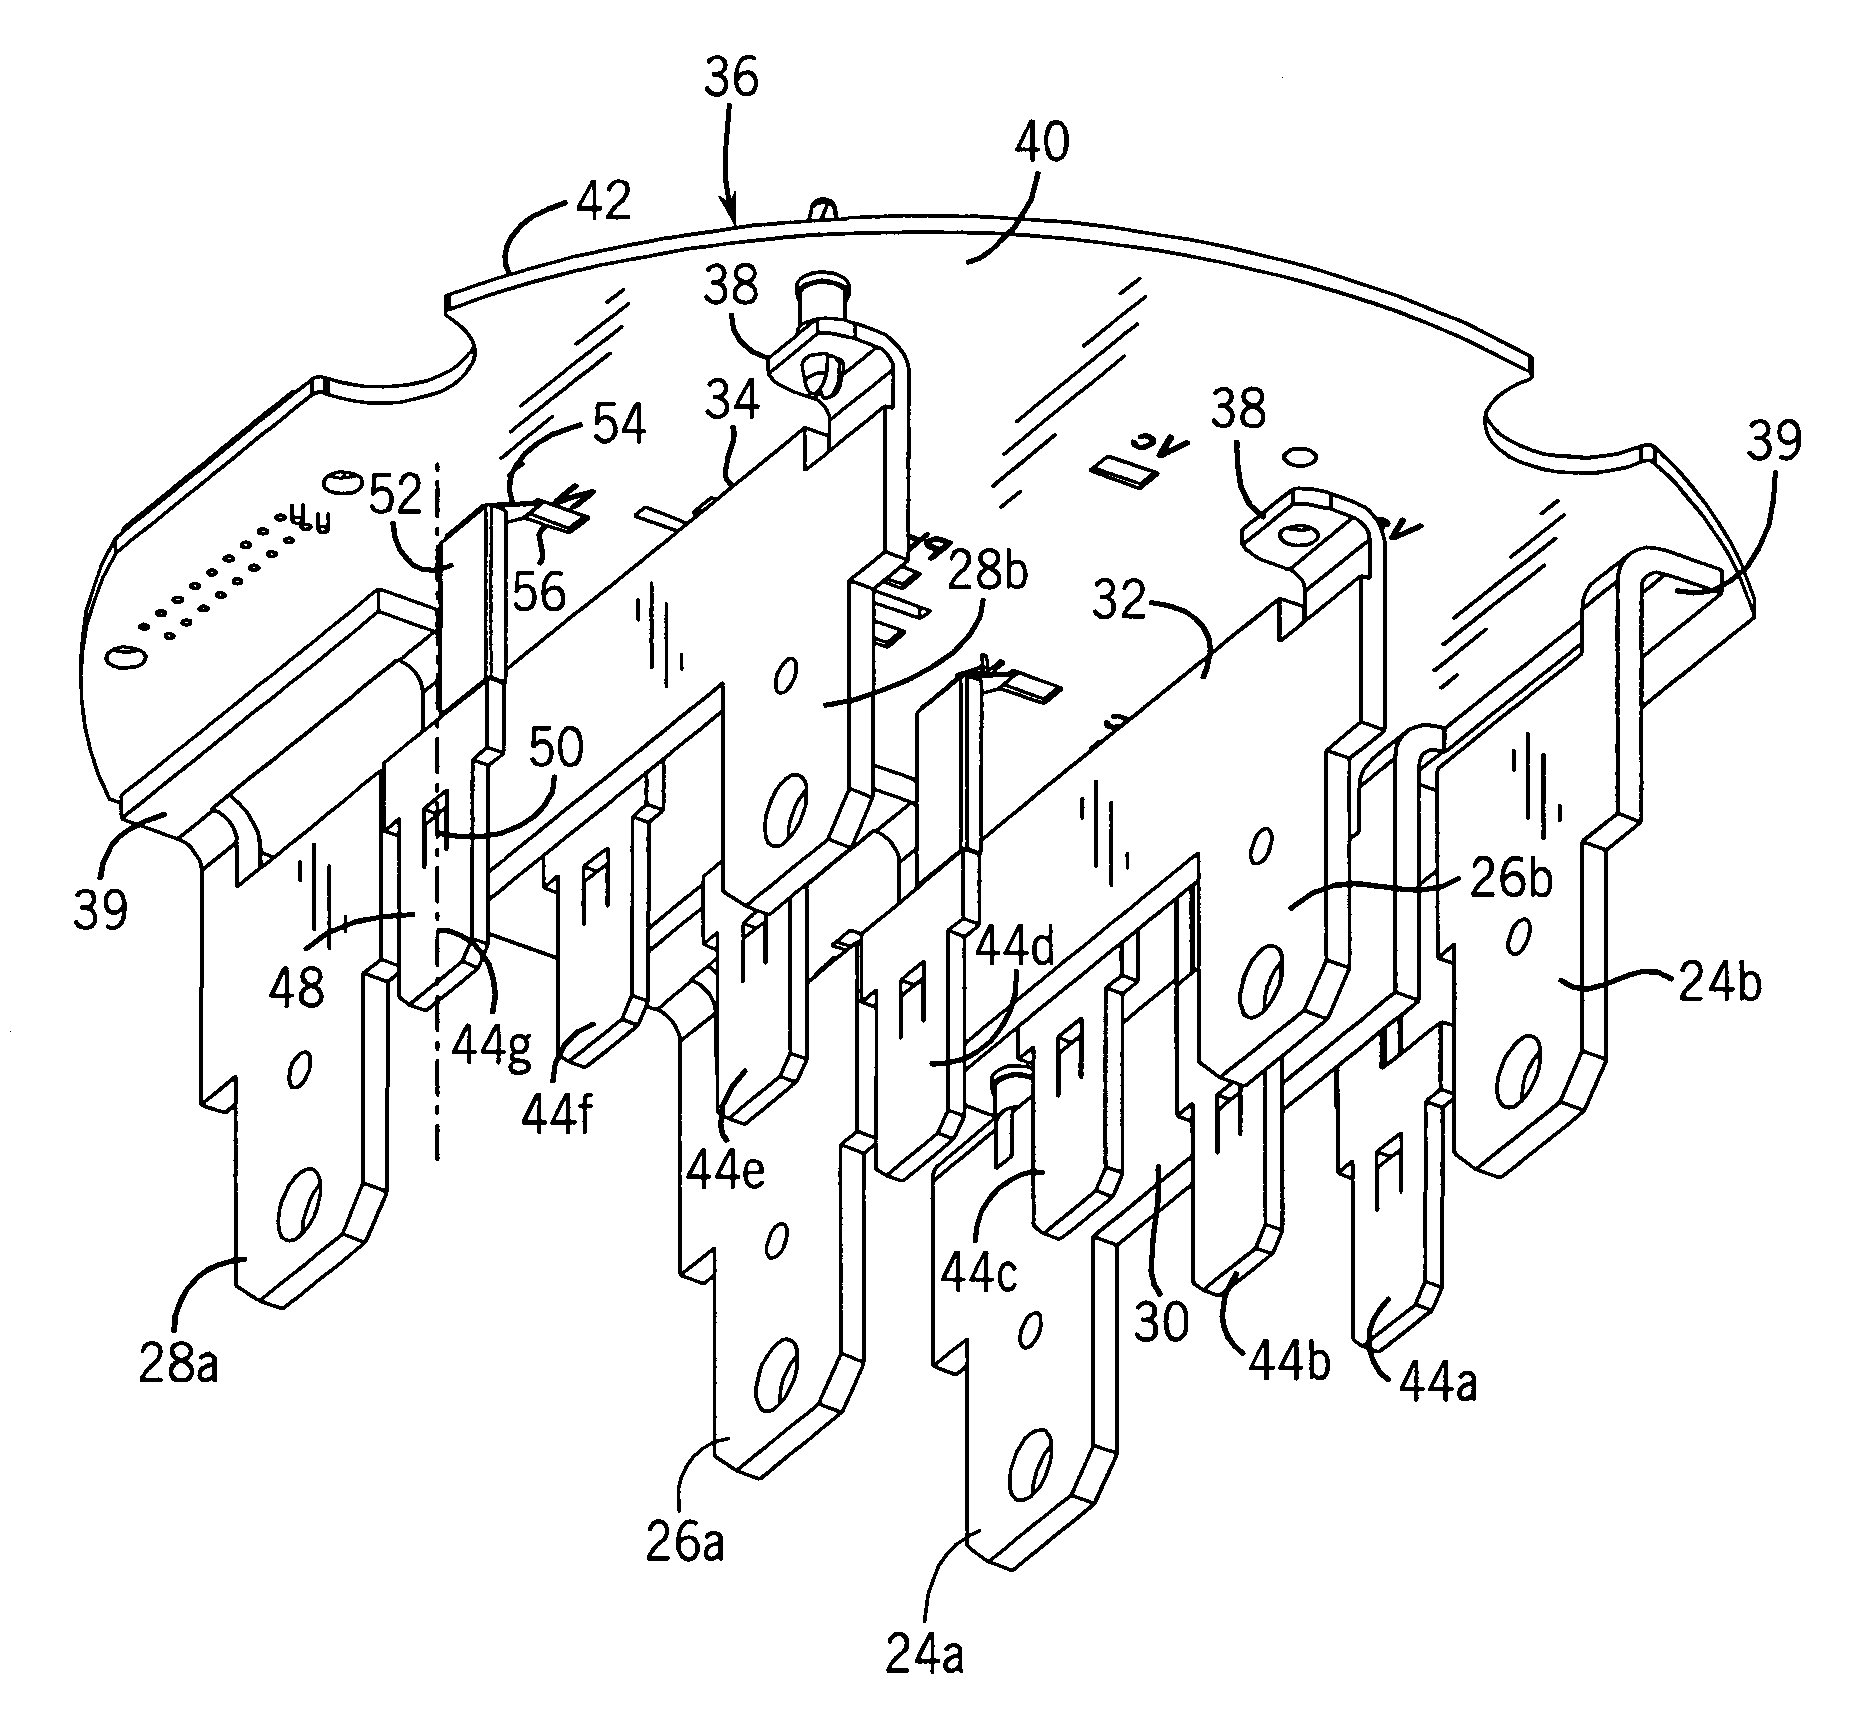 Electronic electricity meter having configurable contacts